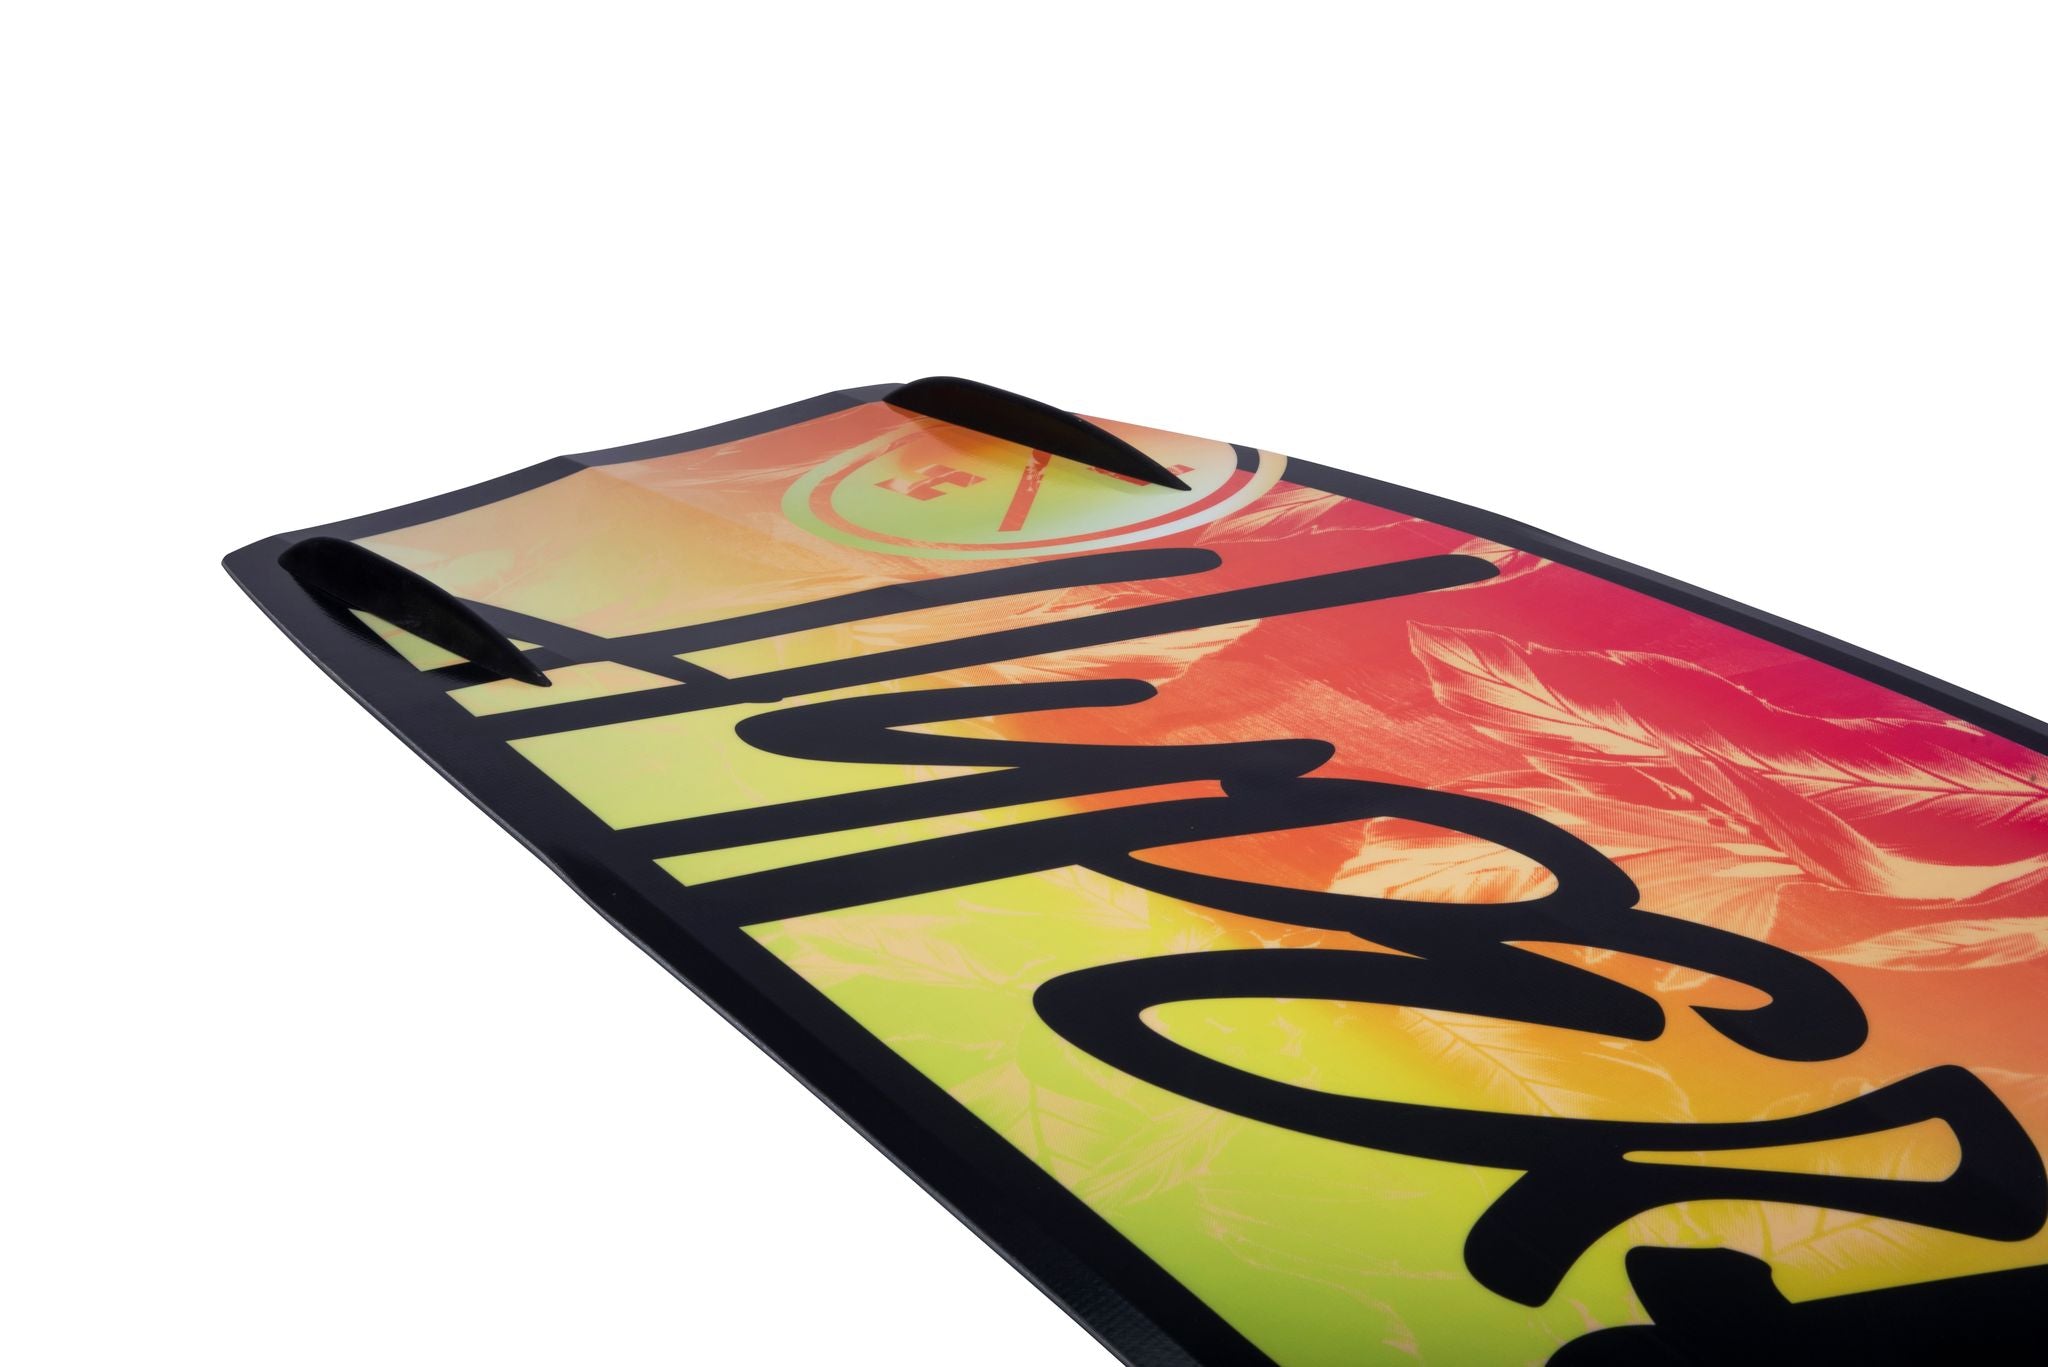 A Hyperlite 2023 Cadence Wakeboard with a colorful design on it from Hyperlite's Cadence series.